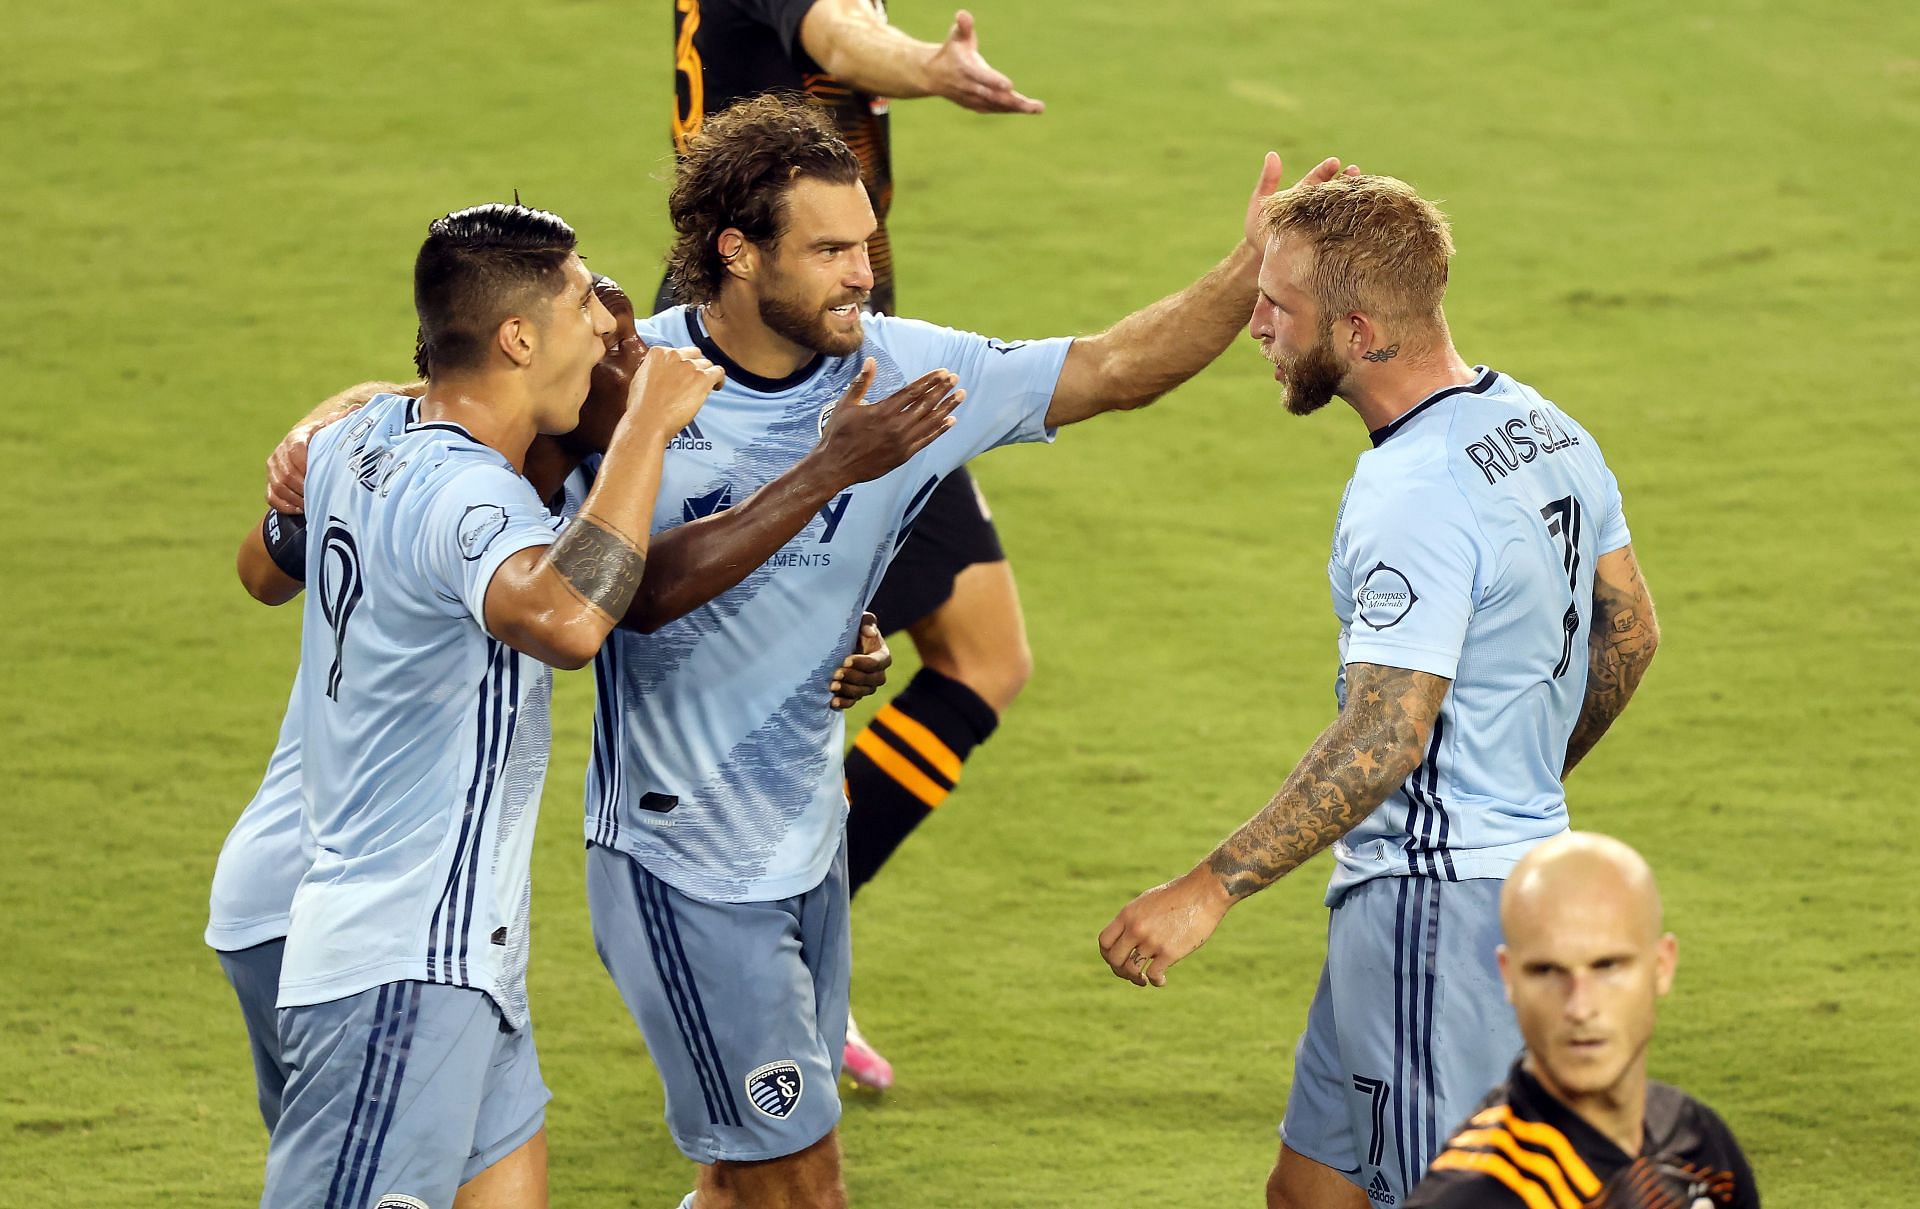 Sporting Kansas City take on Los Angeles FC this weekend